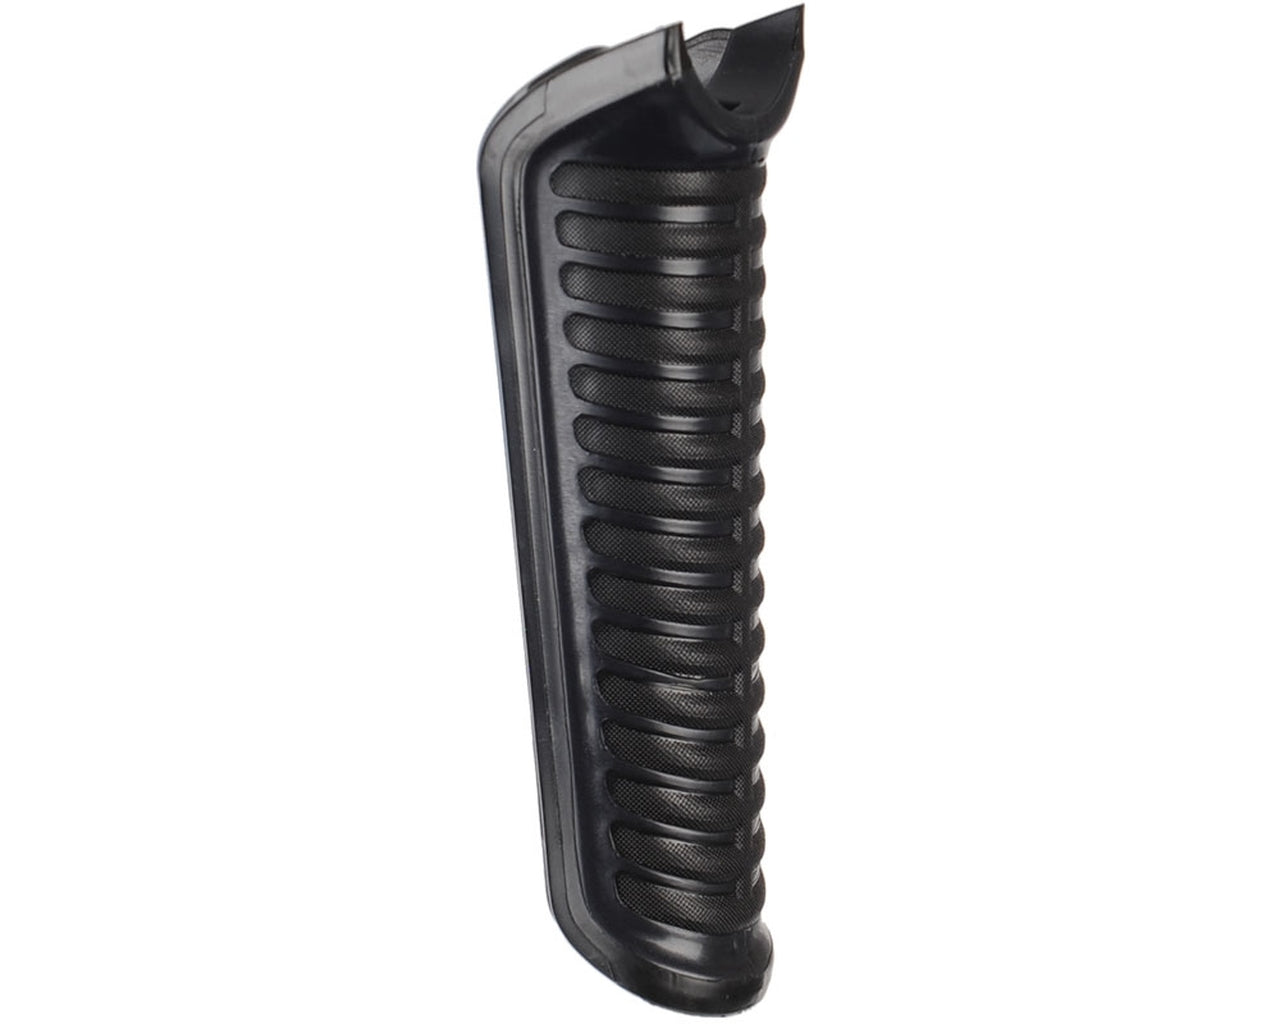 DLX Luxe Rubber Fore Grip - Black (Lux449)